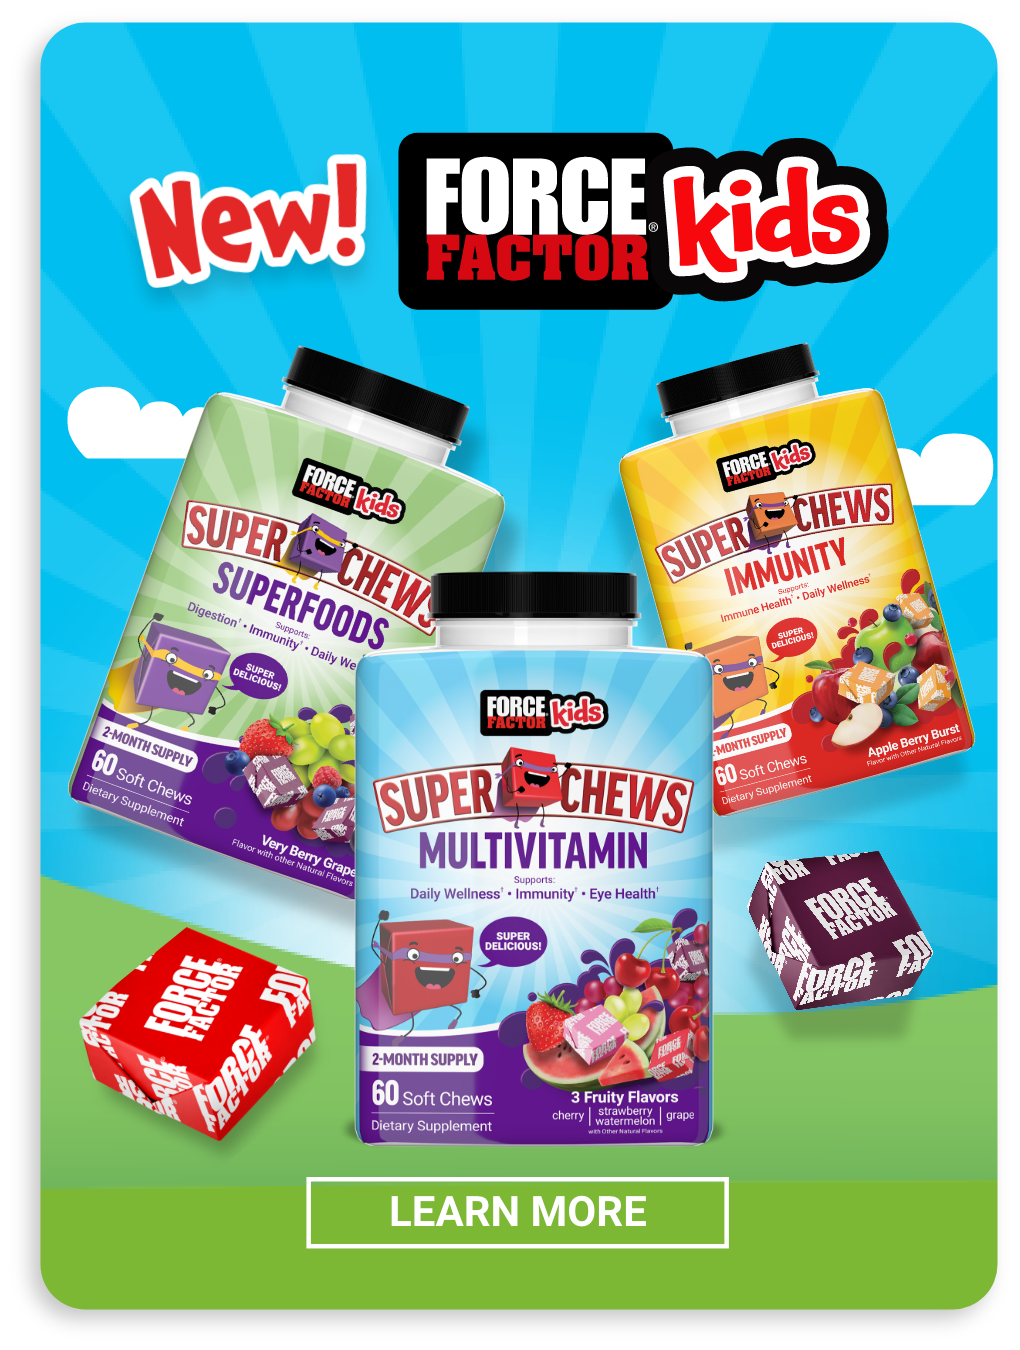 New! Force Factor Kids - Learn More